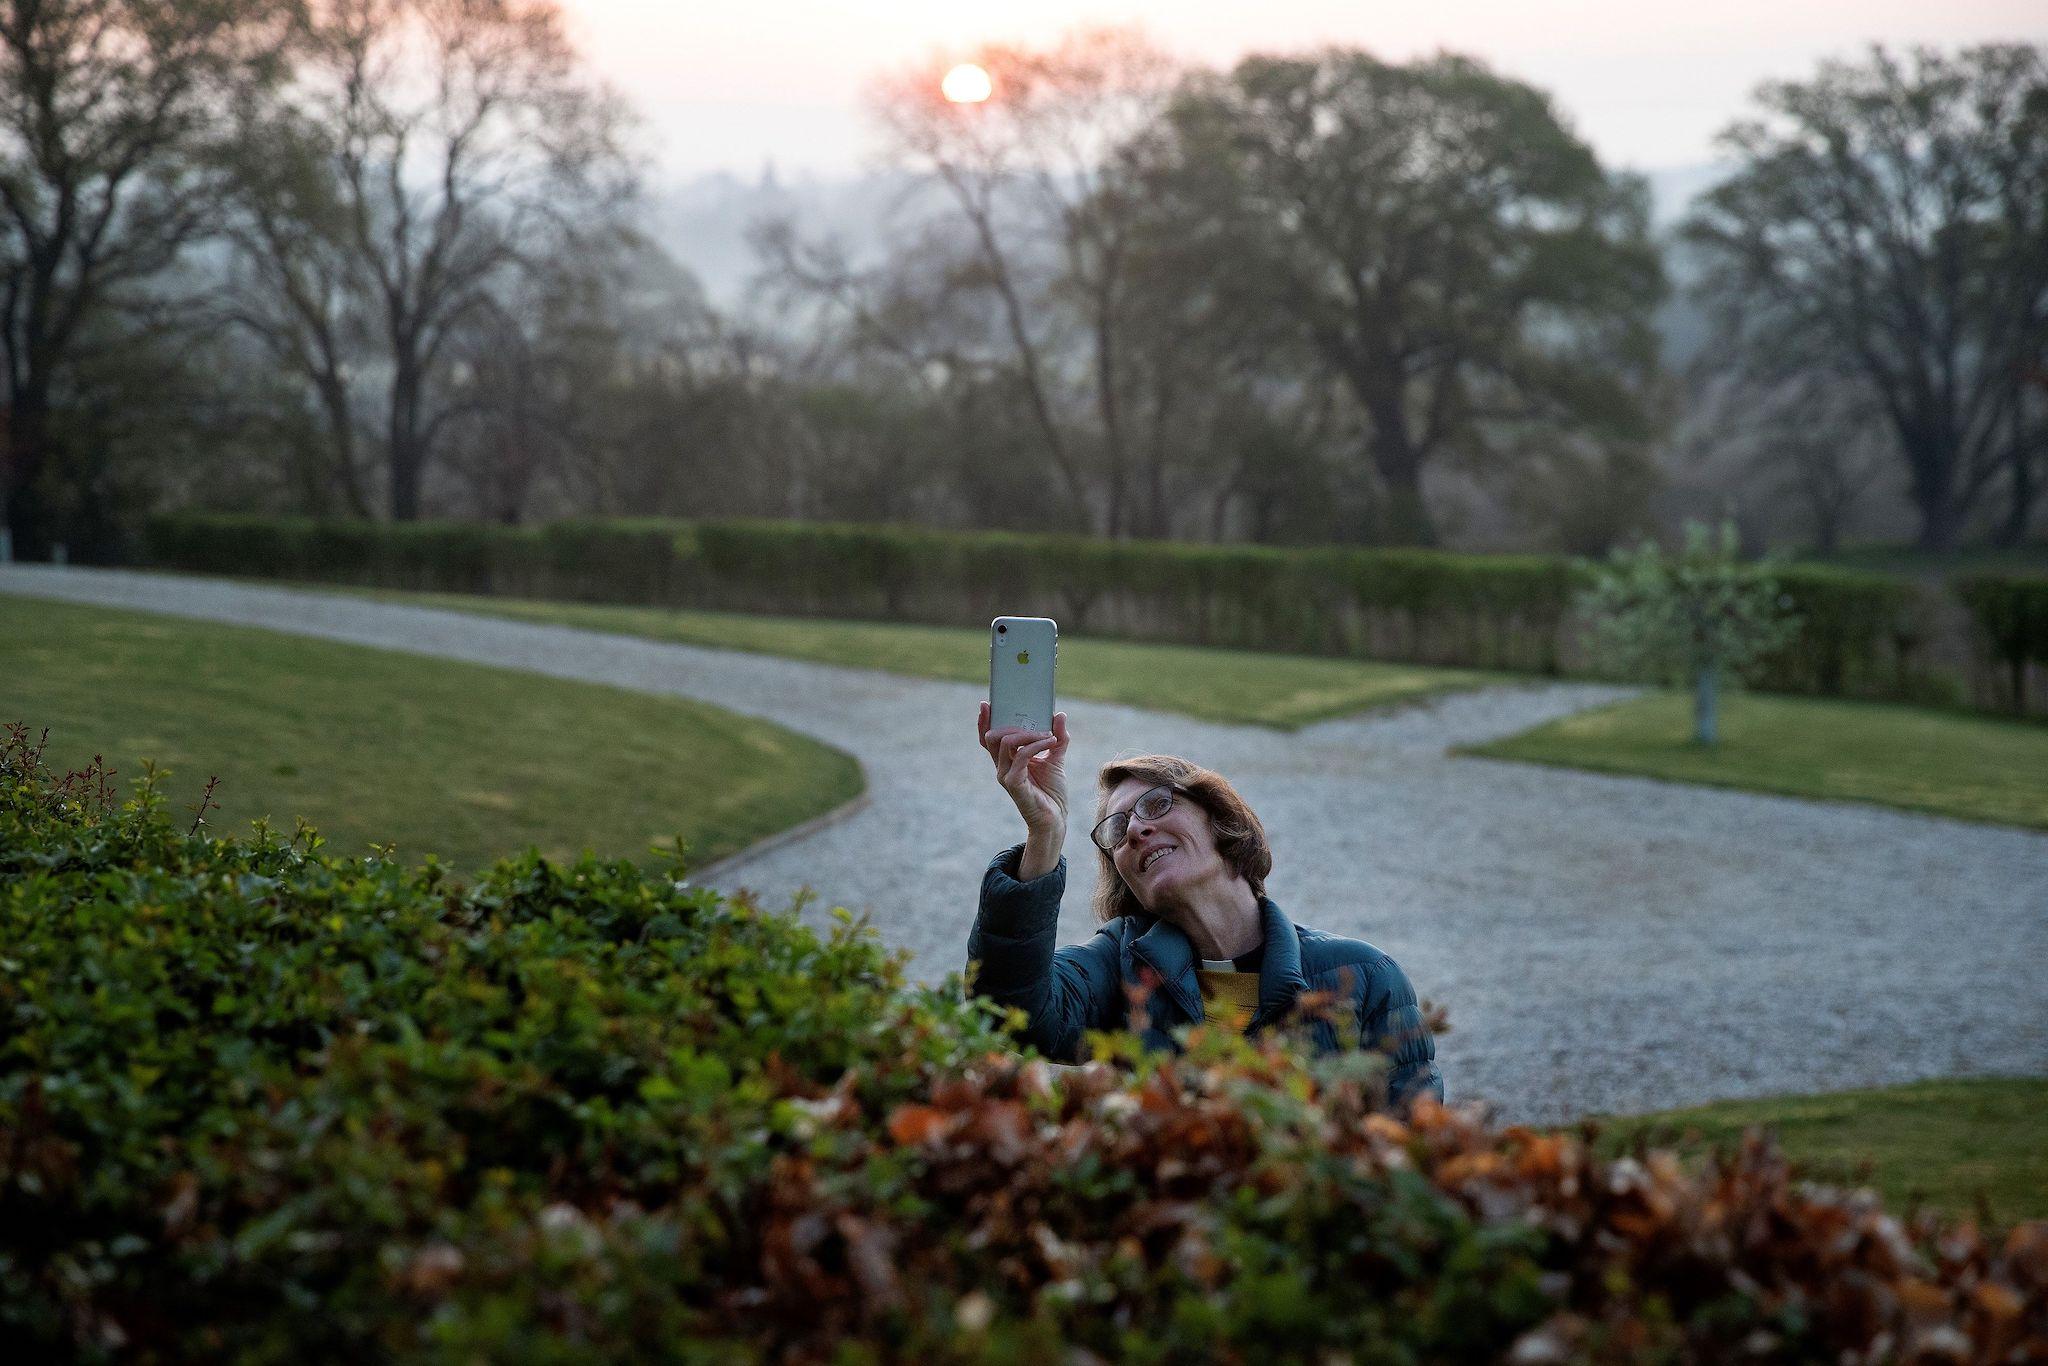 Priest-in-Charge Angie Smith, uses her smartphone to film the sunrise whilst live-broadcasting an Easter Sunday service to her congregation at dawn, from the churchyard of Old St. Mary's Church in Hartley Wintney, west of London, on April 12, 2020